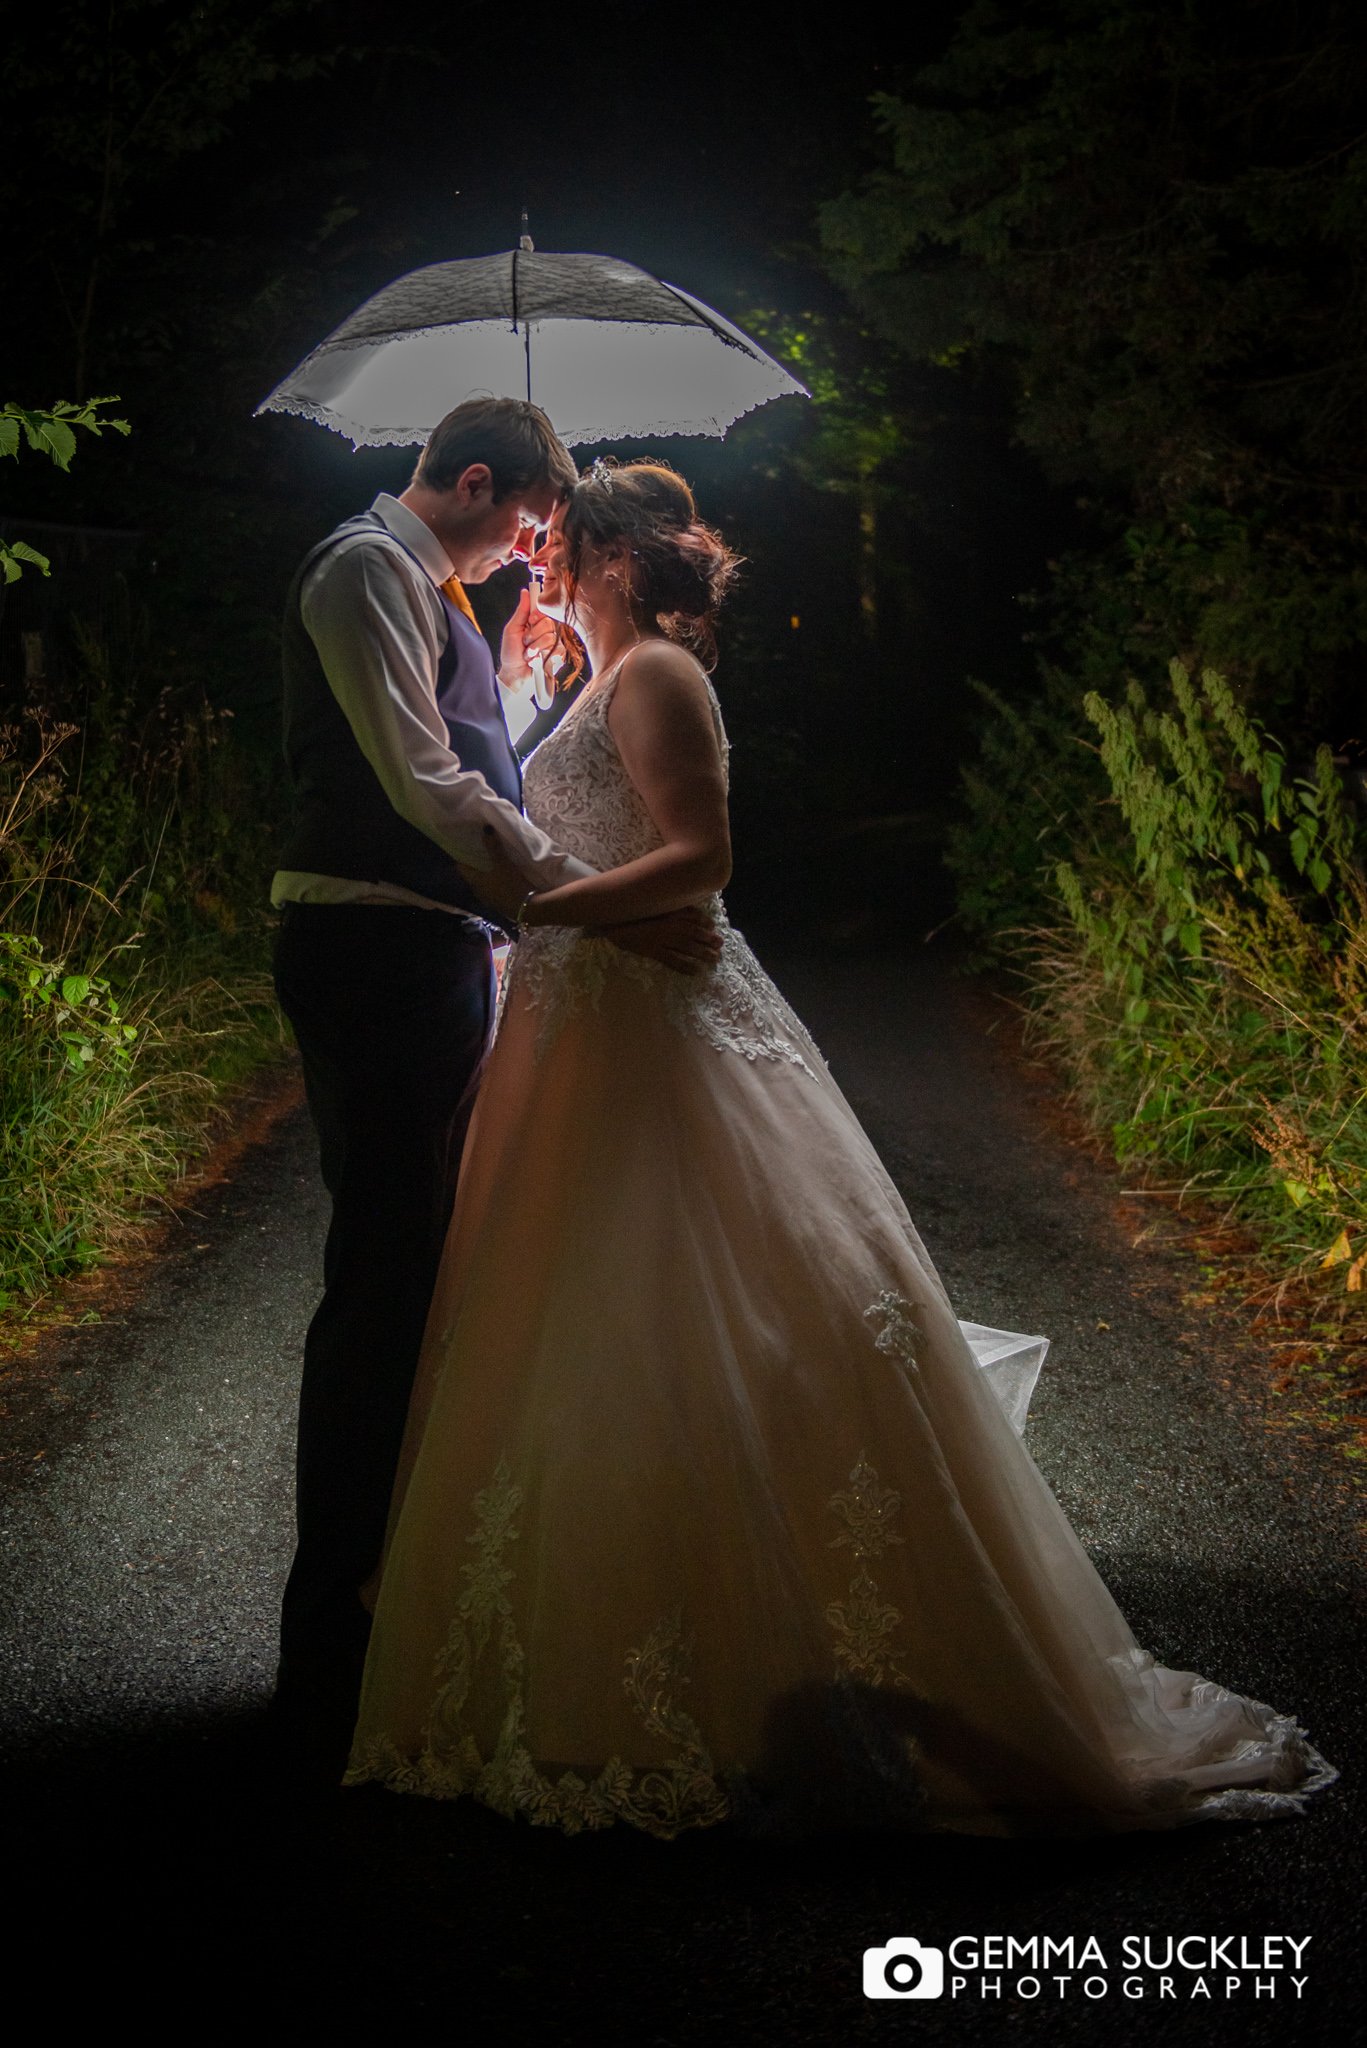 night photography of the bride and groom hugging under an umbrella